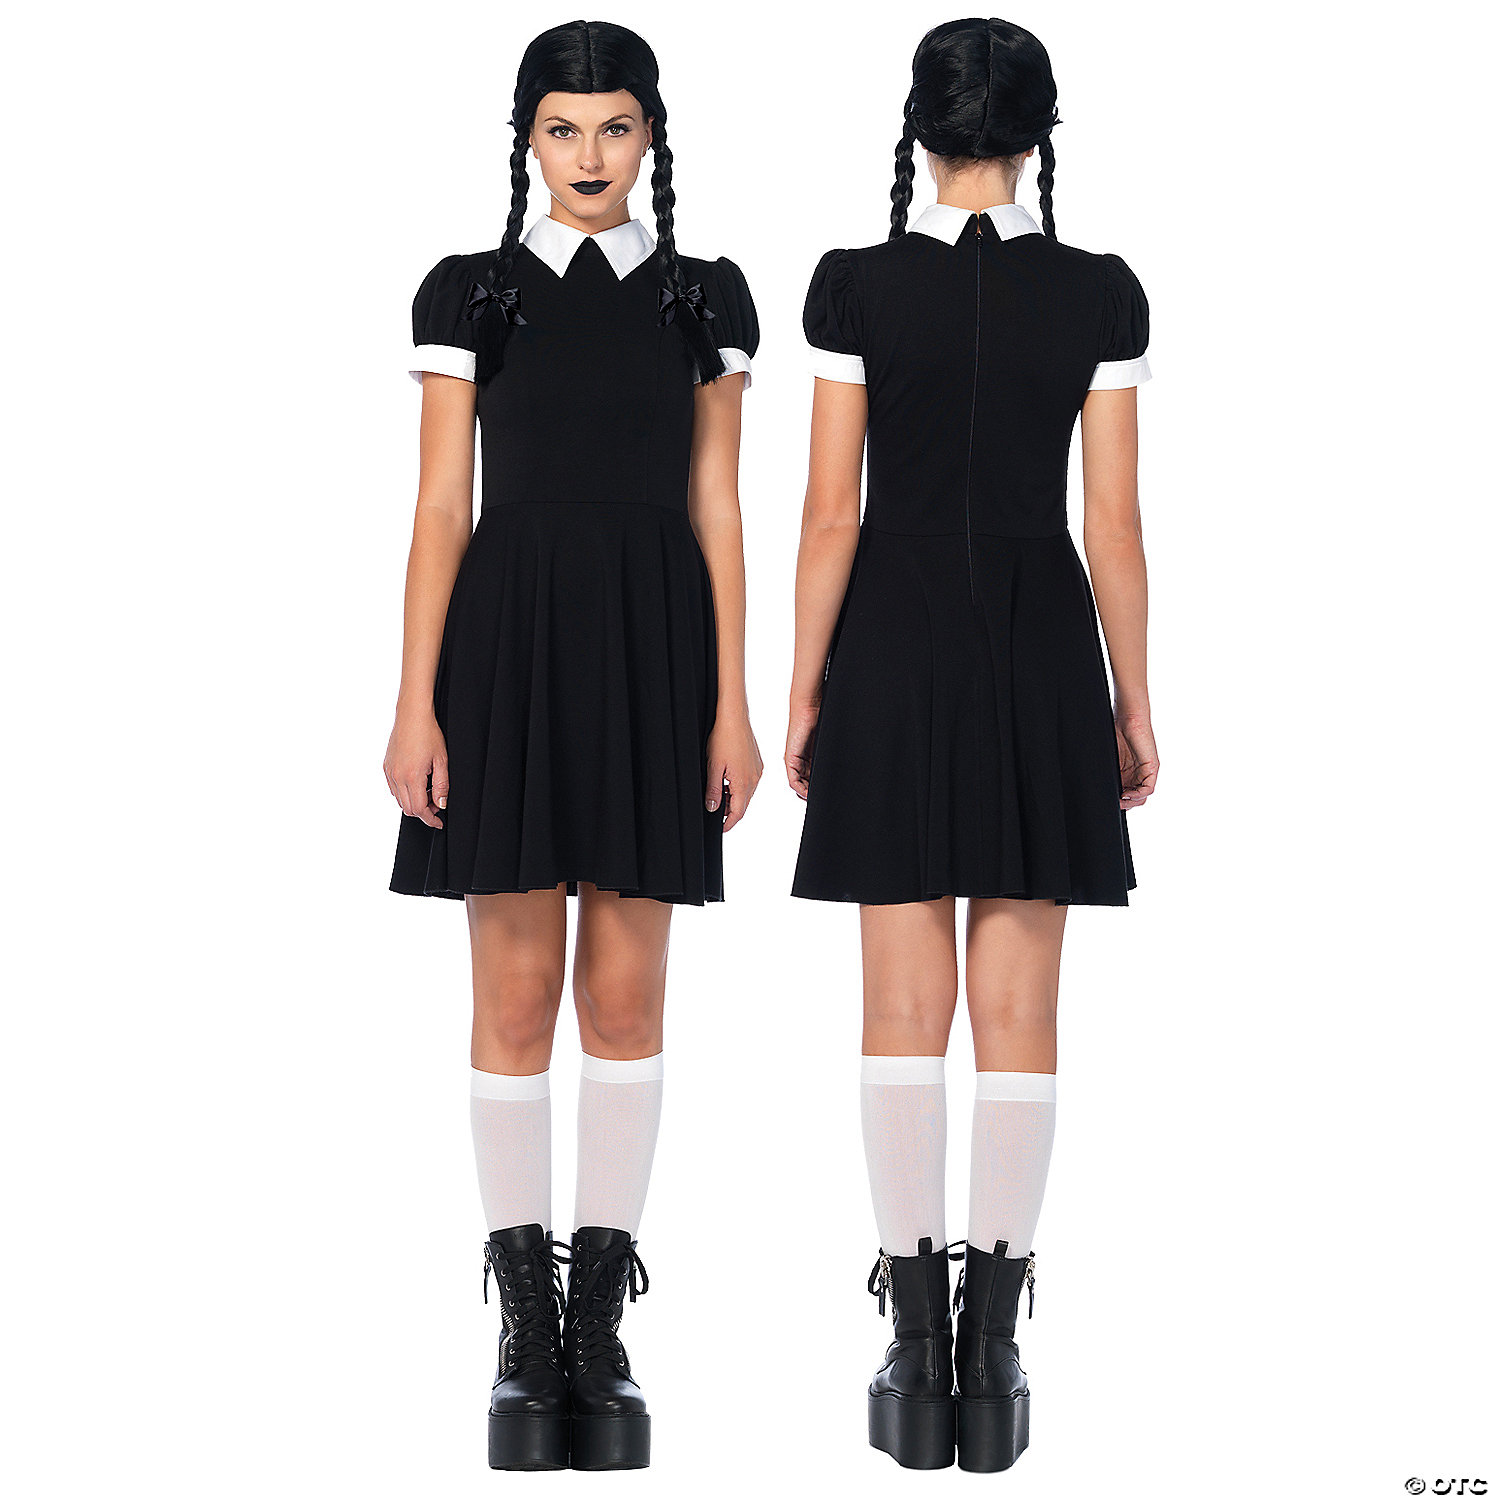 Women's Gothic Darling Costume | Oriental Trading